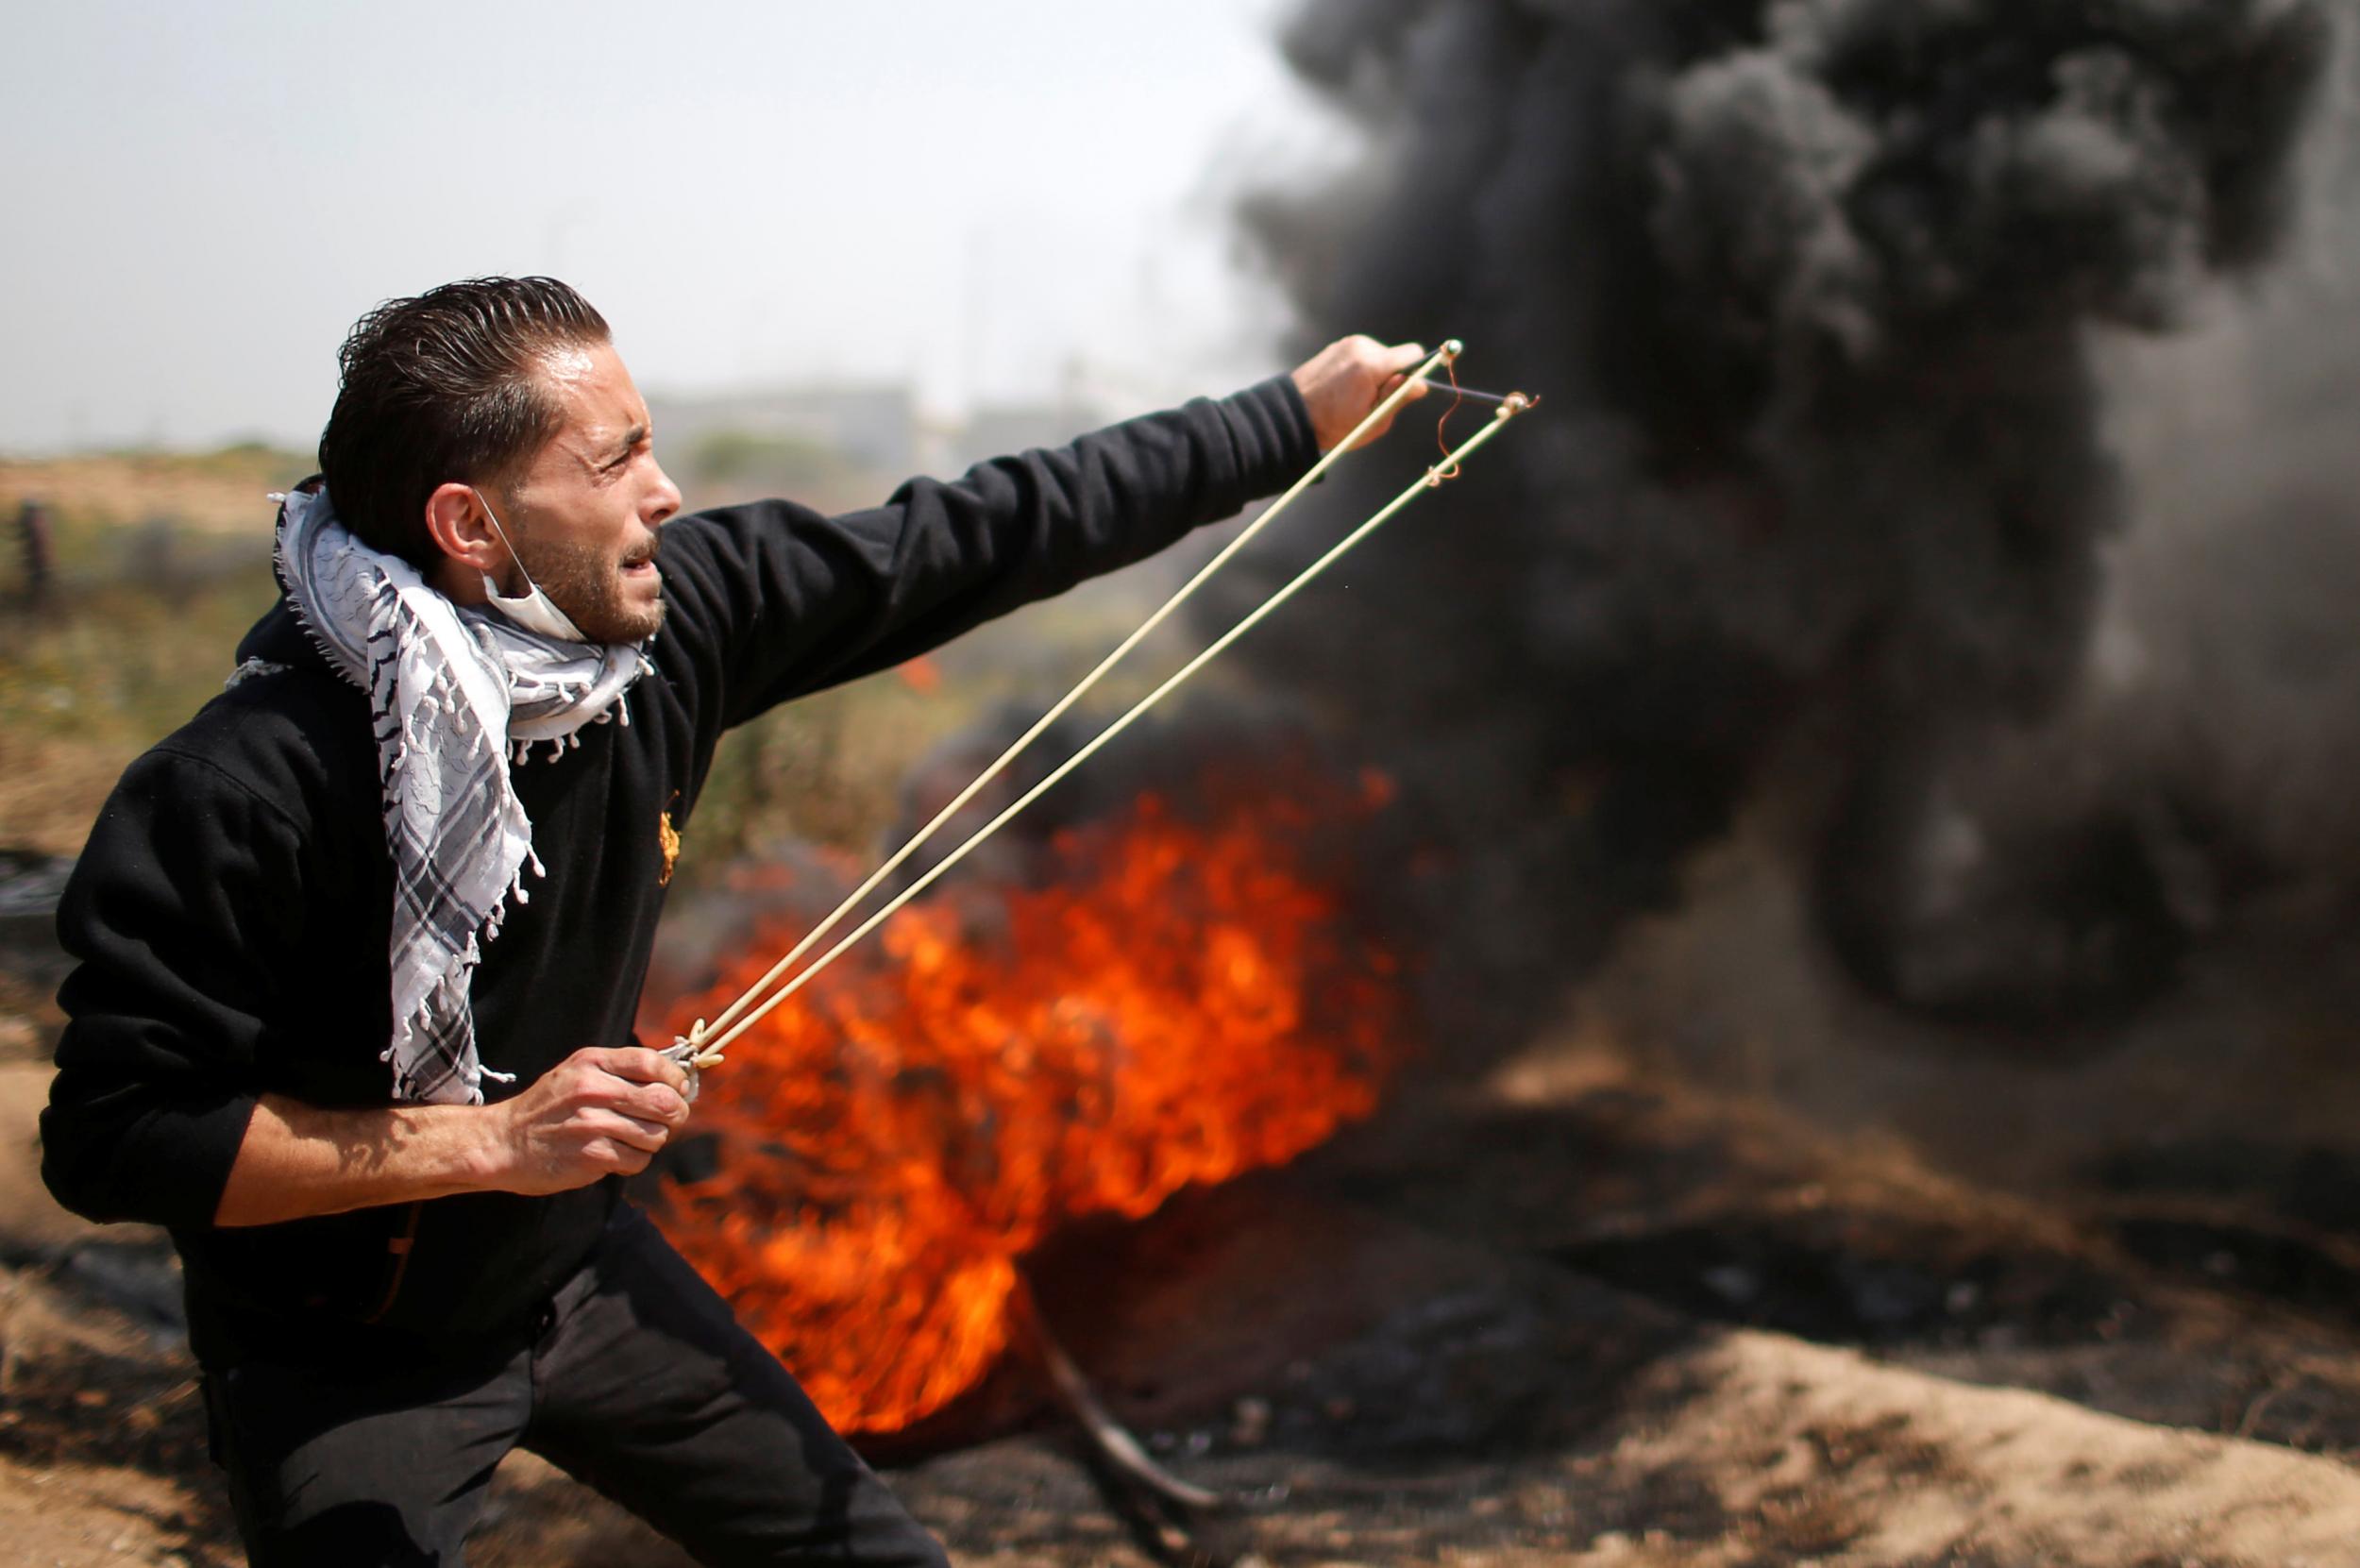 A Palestinian shoots a missile at Israeli troops in the border violence